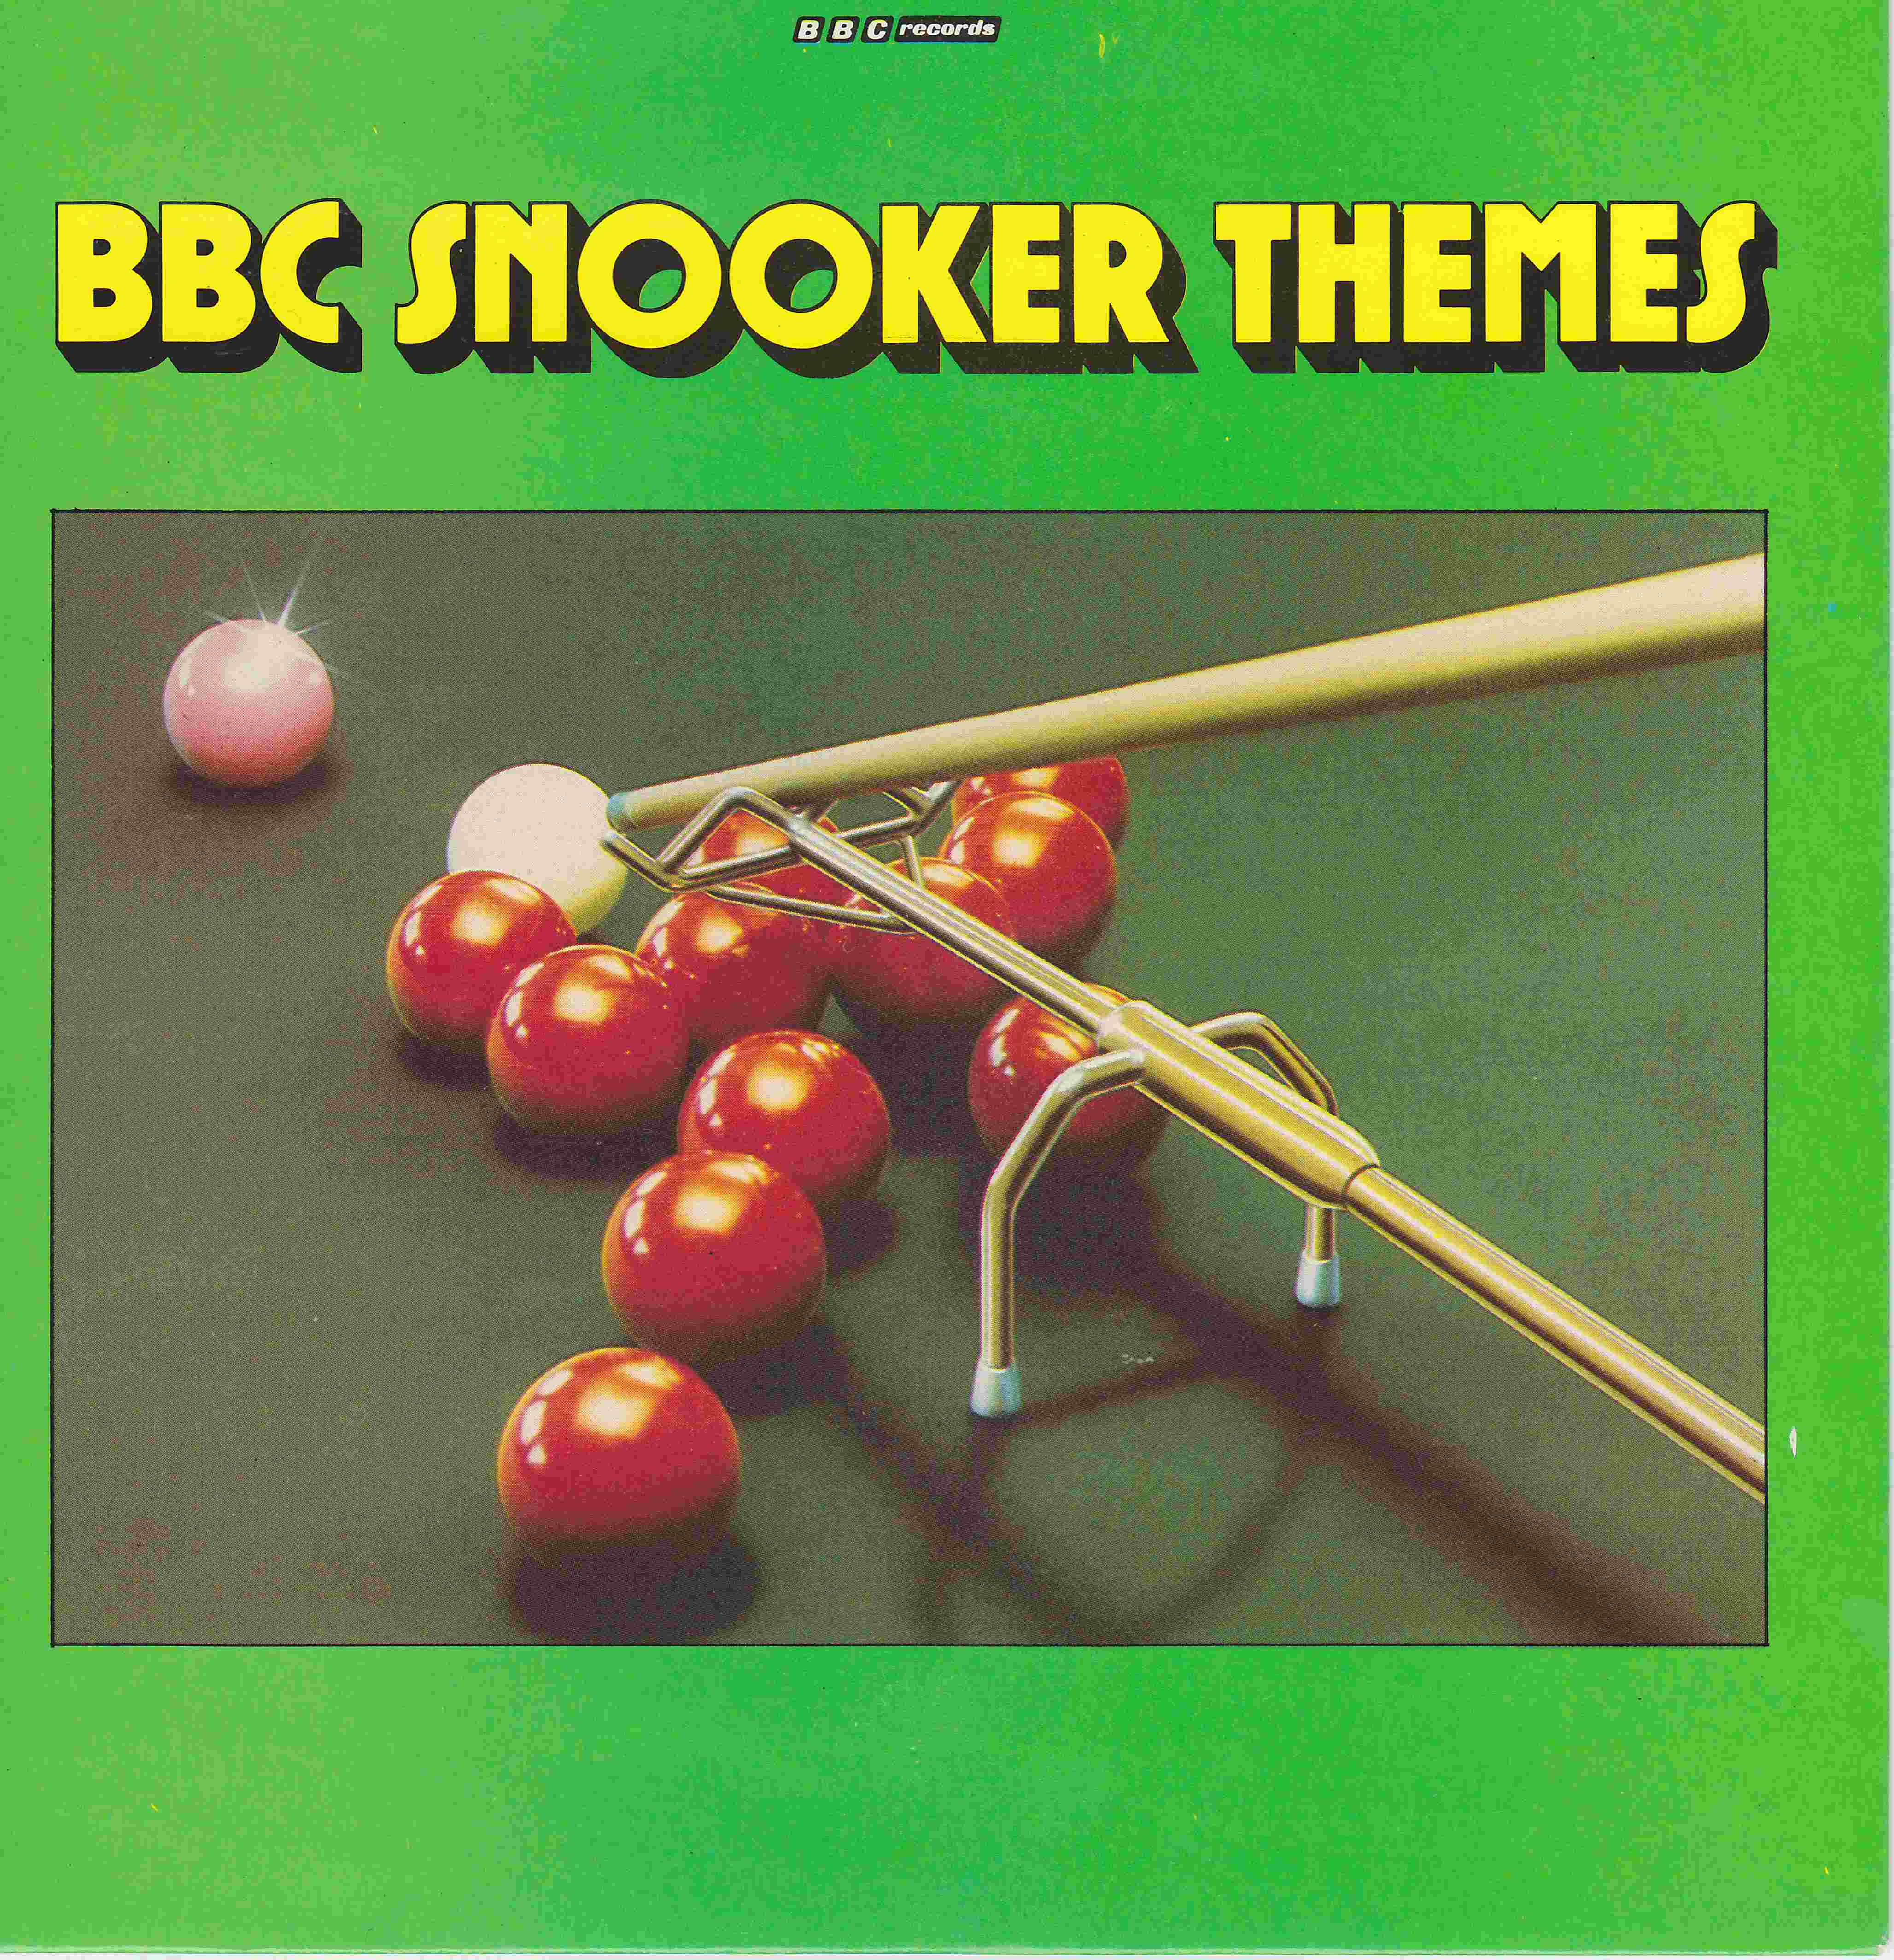 Picture of RESL 144 BBC Snooker themes by artist The Douglas Wood Group / The Limelight Orchestra / Vangelis / Winifred Atwell from the BBC records and Tapes library